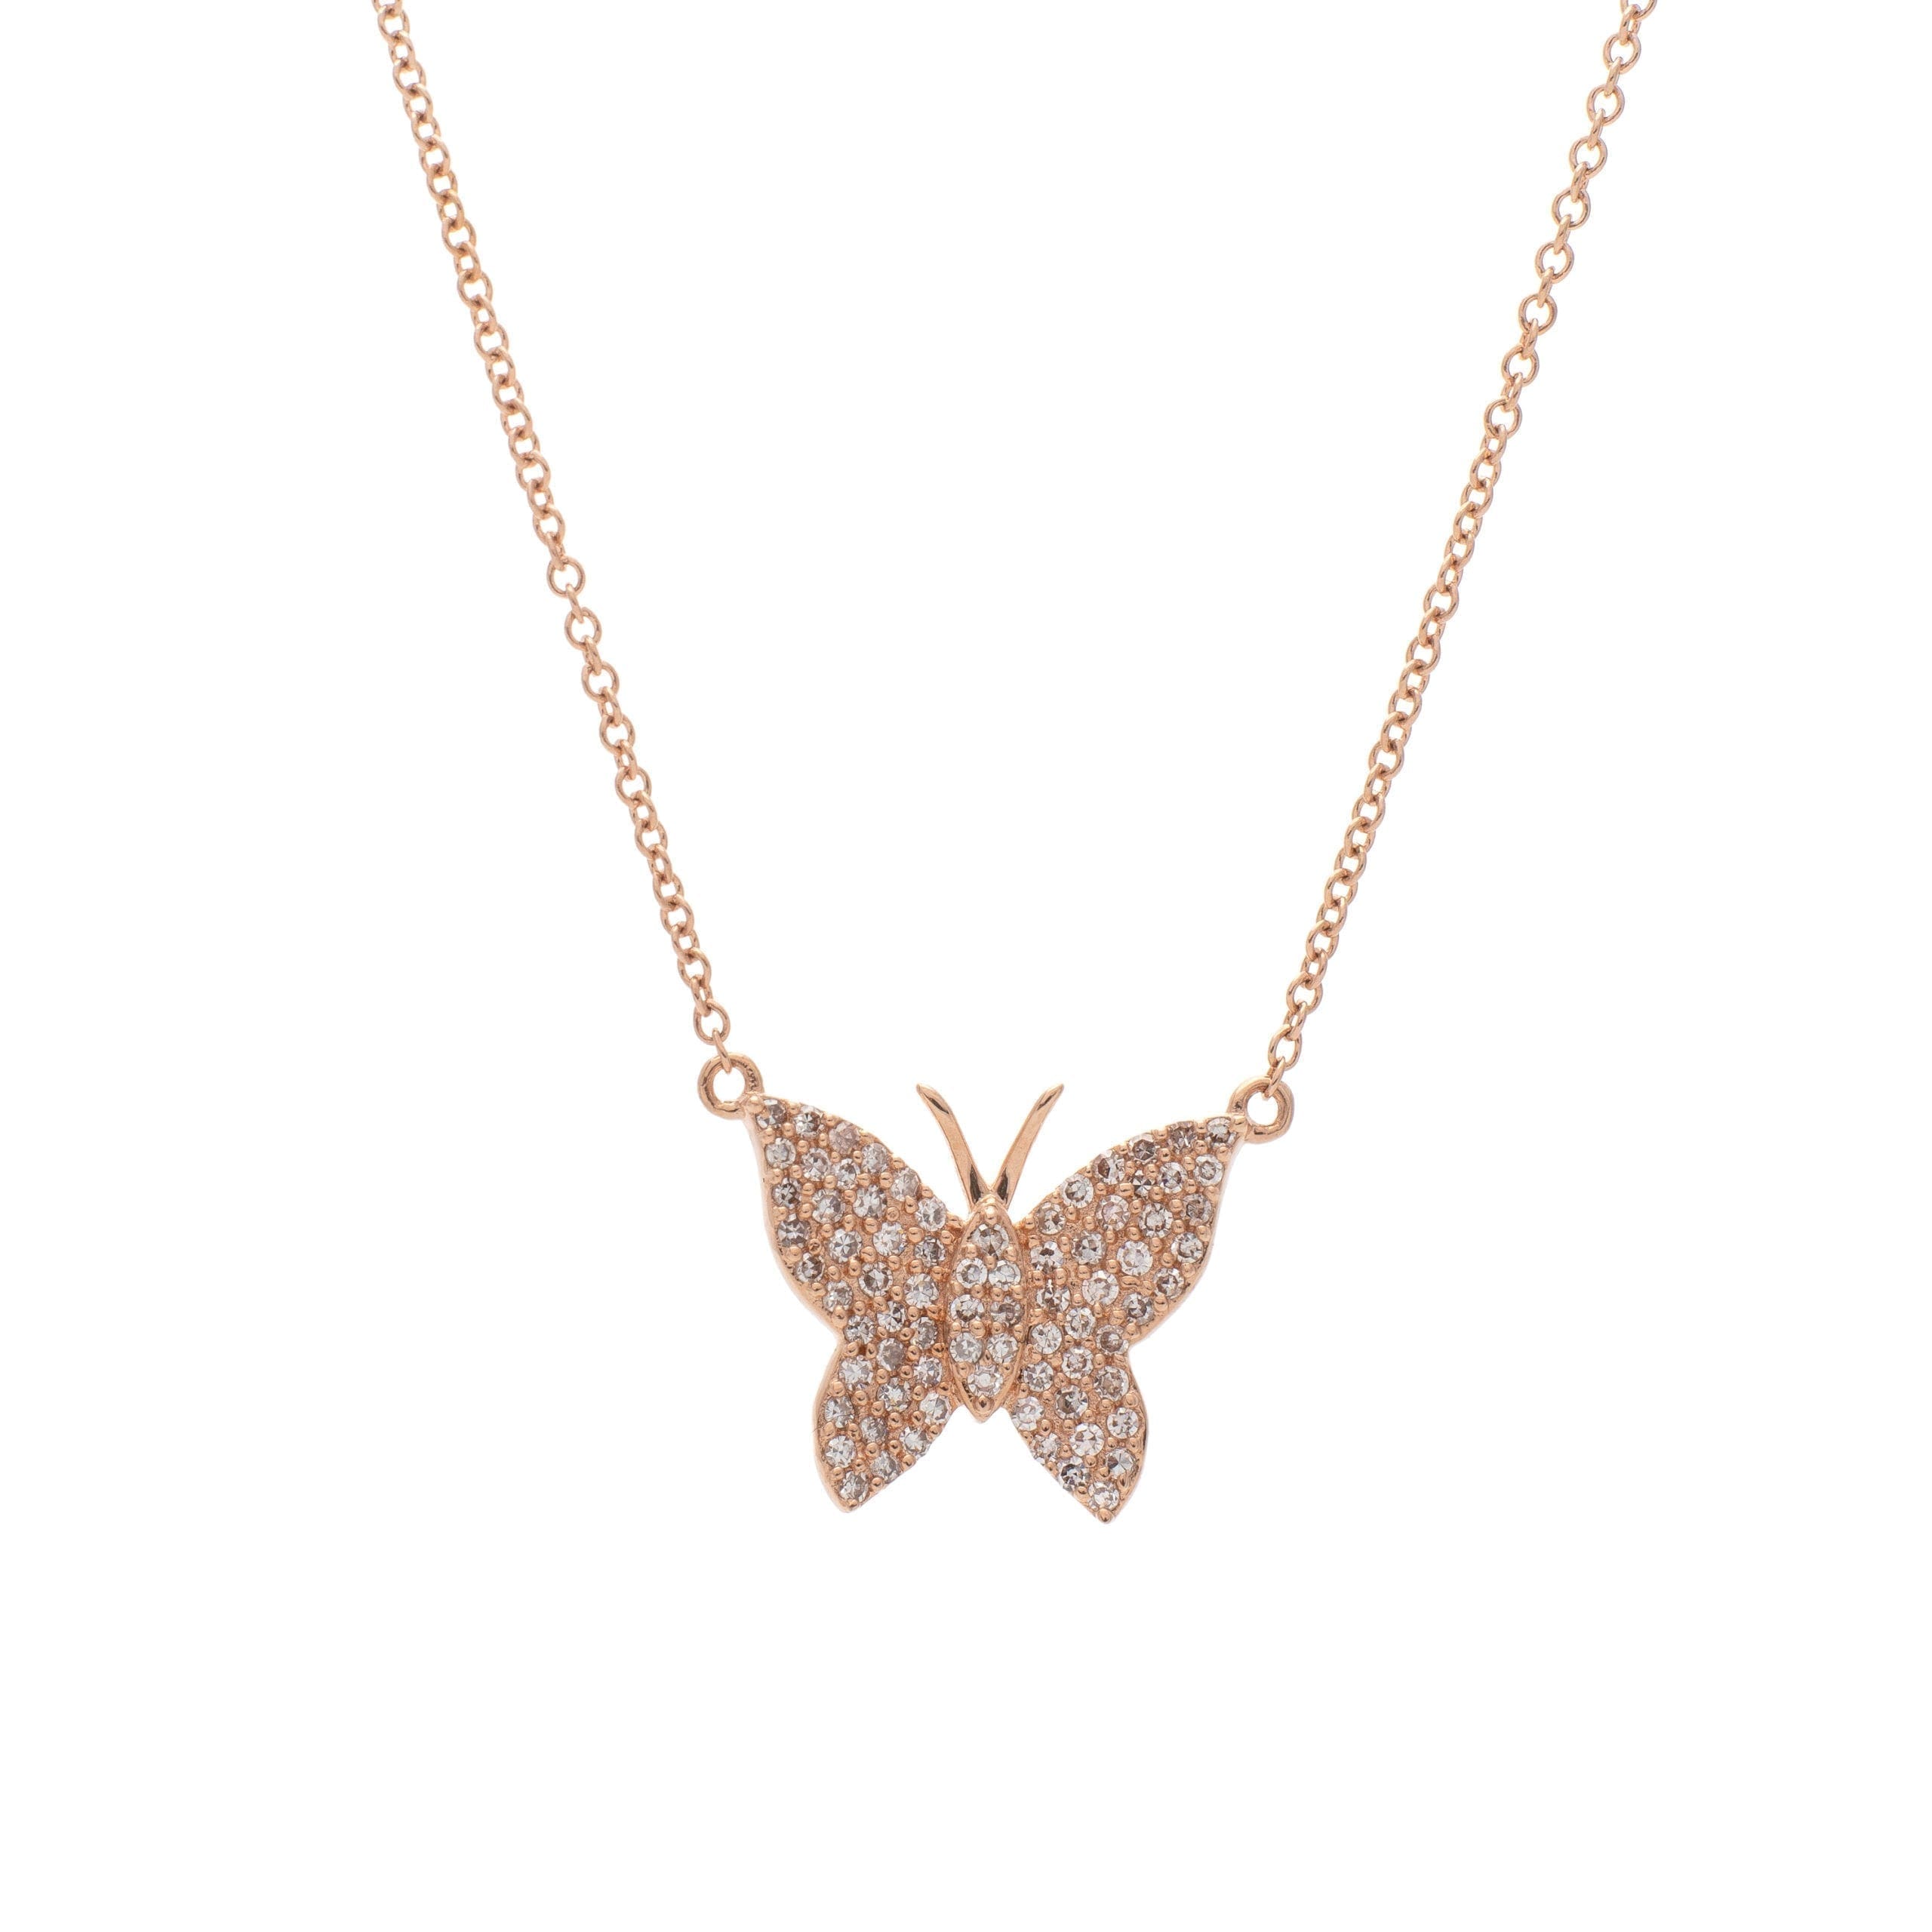 Small Diamond Butterfly Necklace | BE LOVED Jewelry